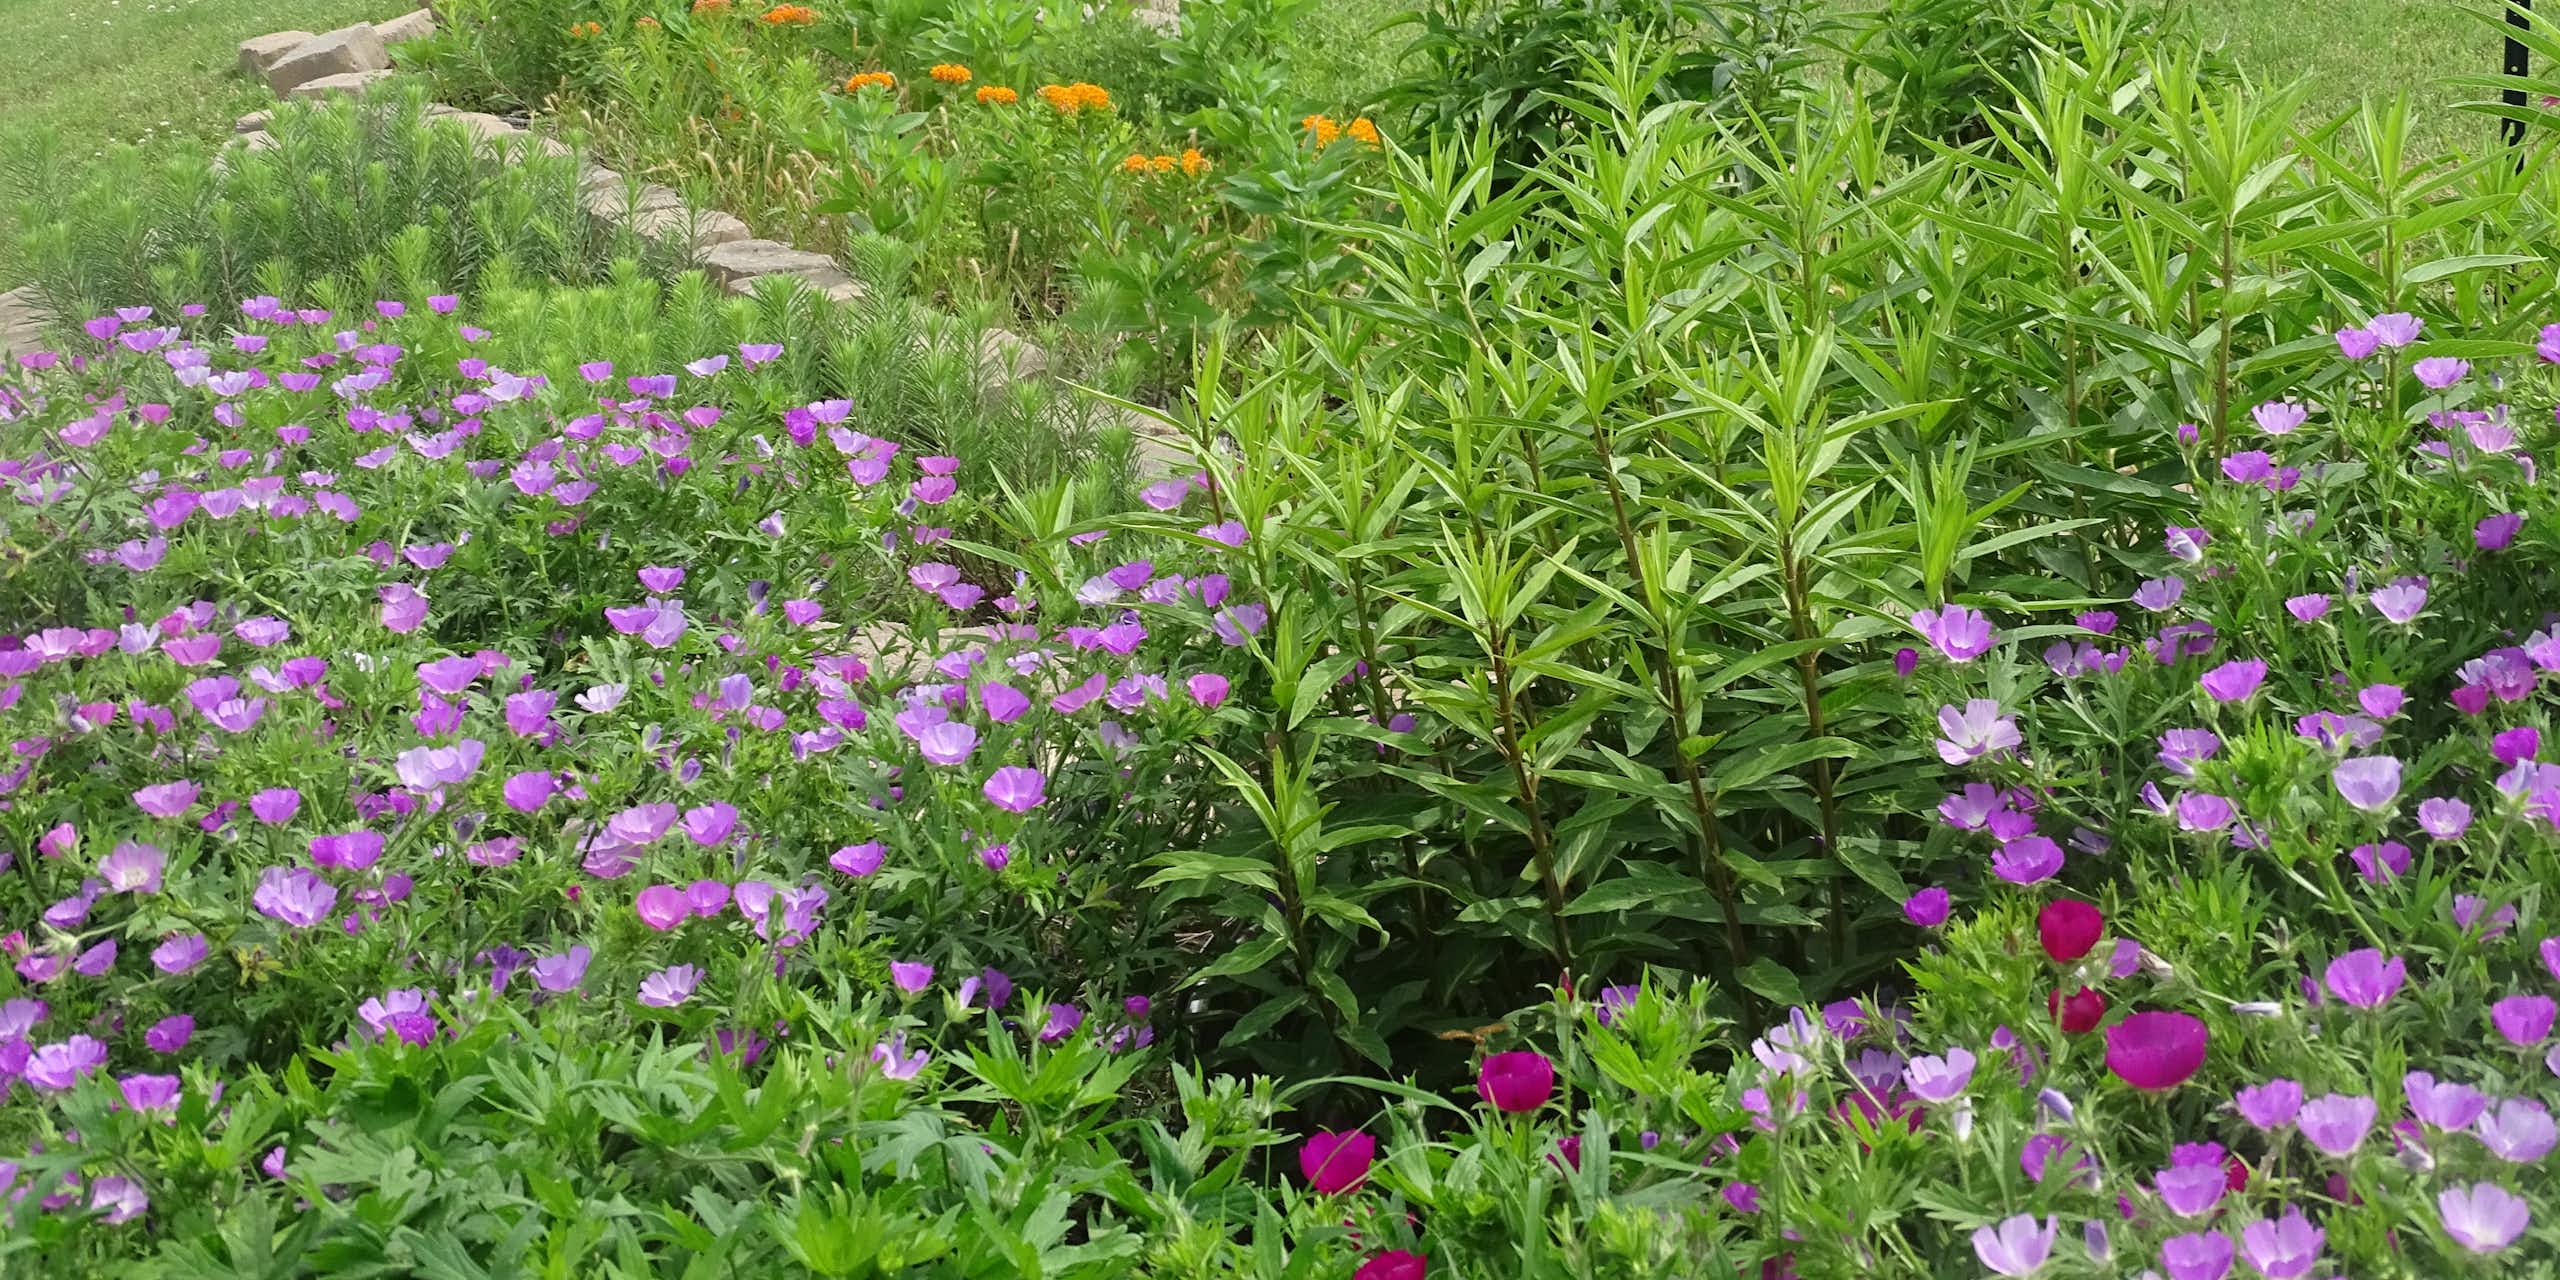 Flowering plants grouped together in a garden